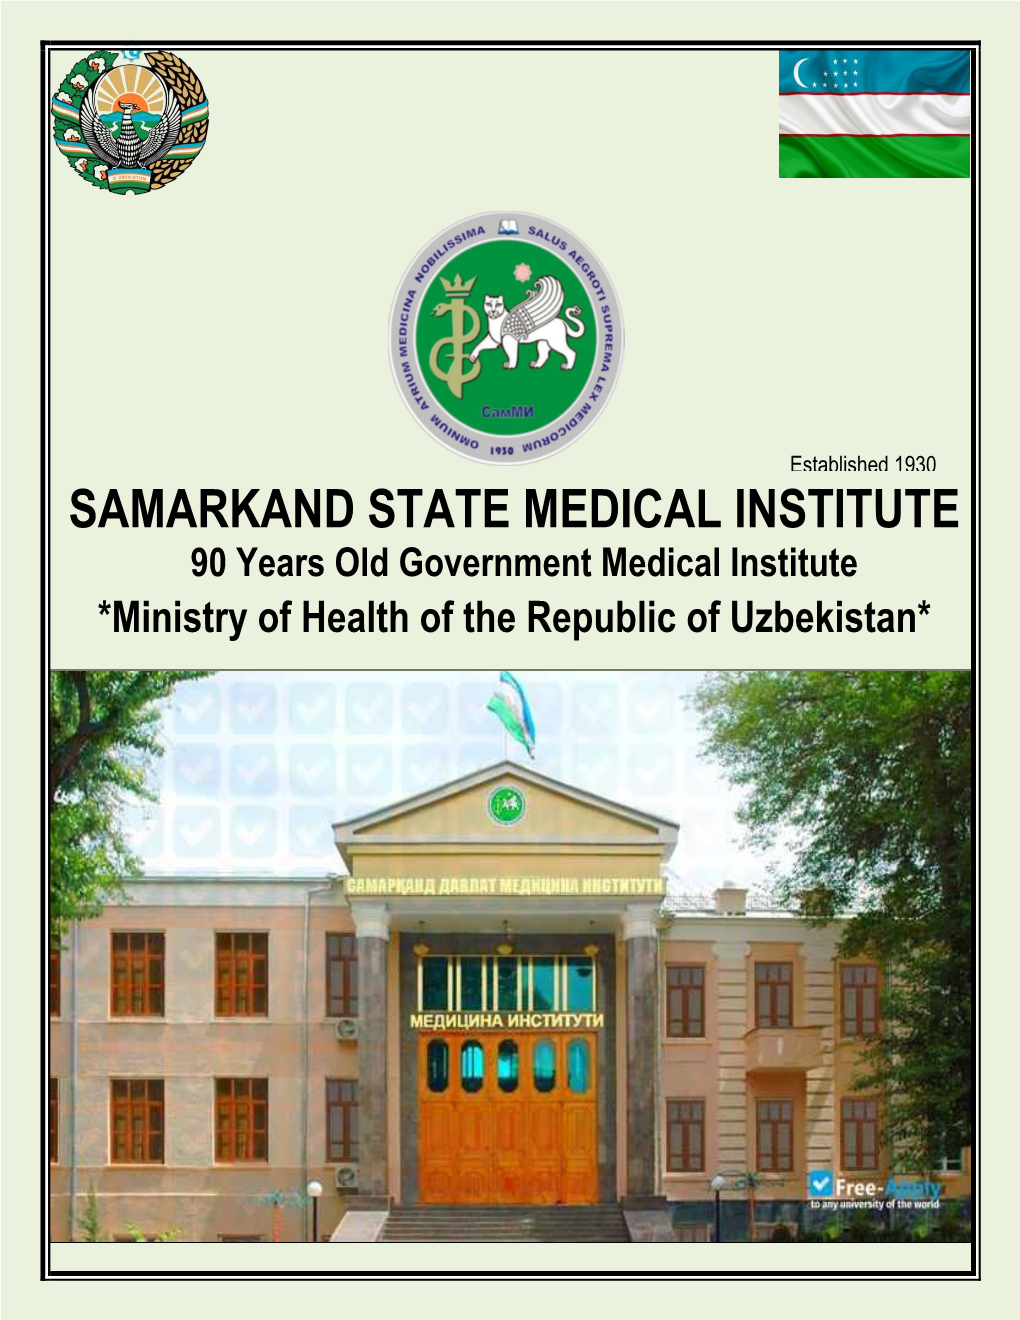 SAMARKAND STATE MEDICAL INSTITUTE 90 Years Old Government Medical Institute *Ministry of Health of the Republic of Uzbekistan*